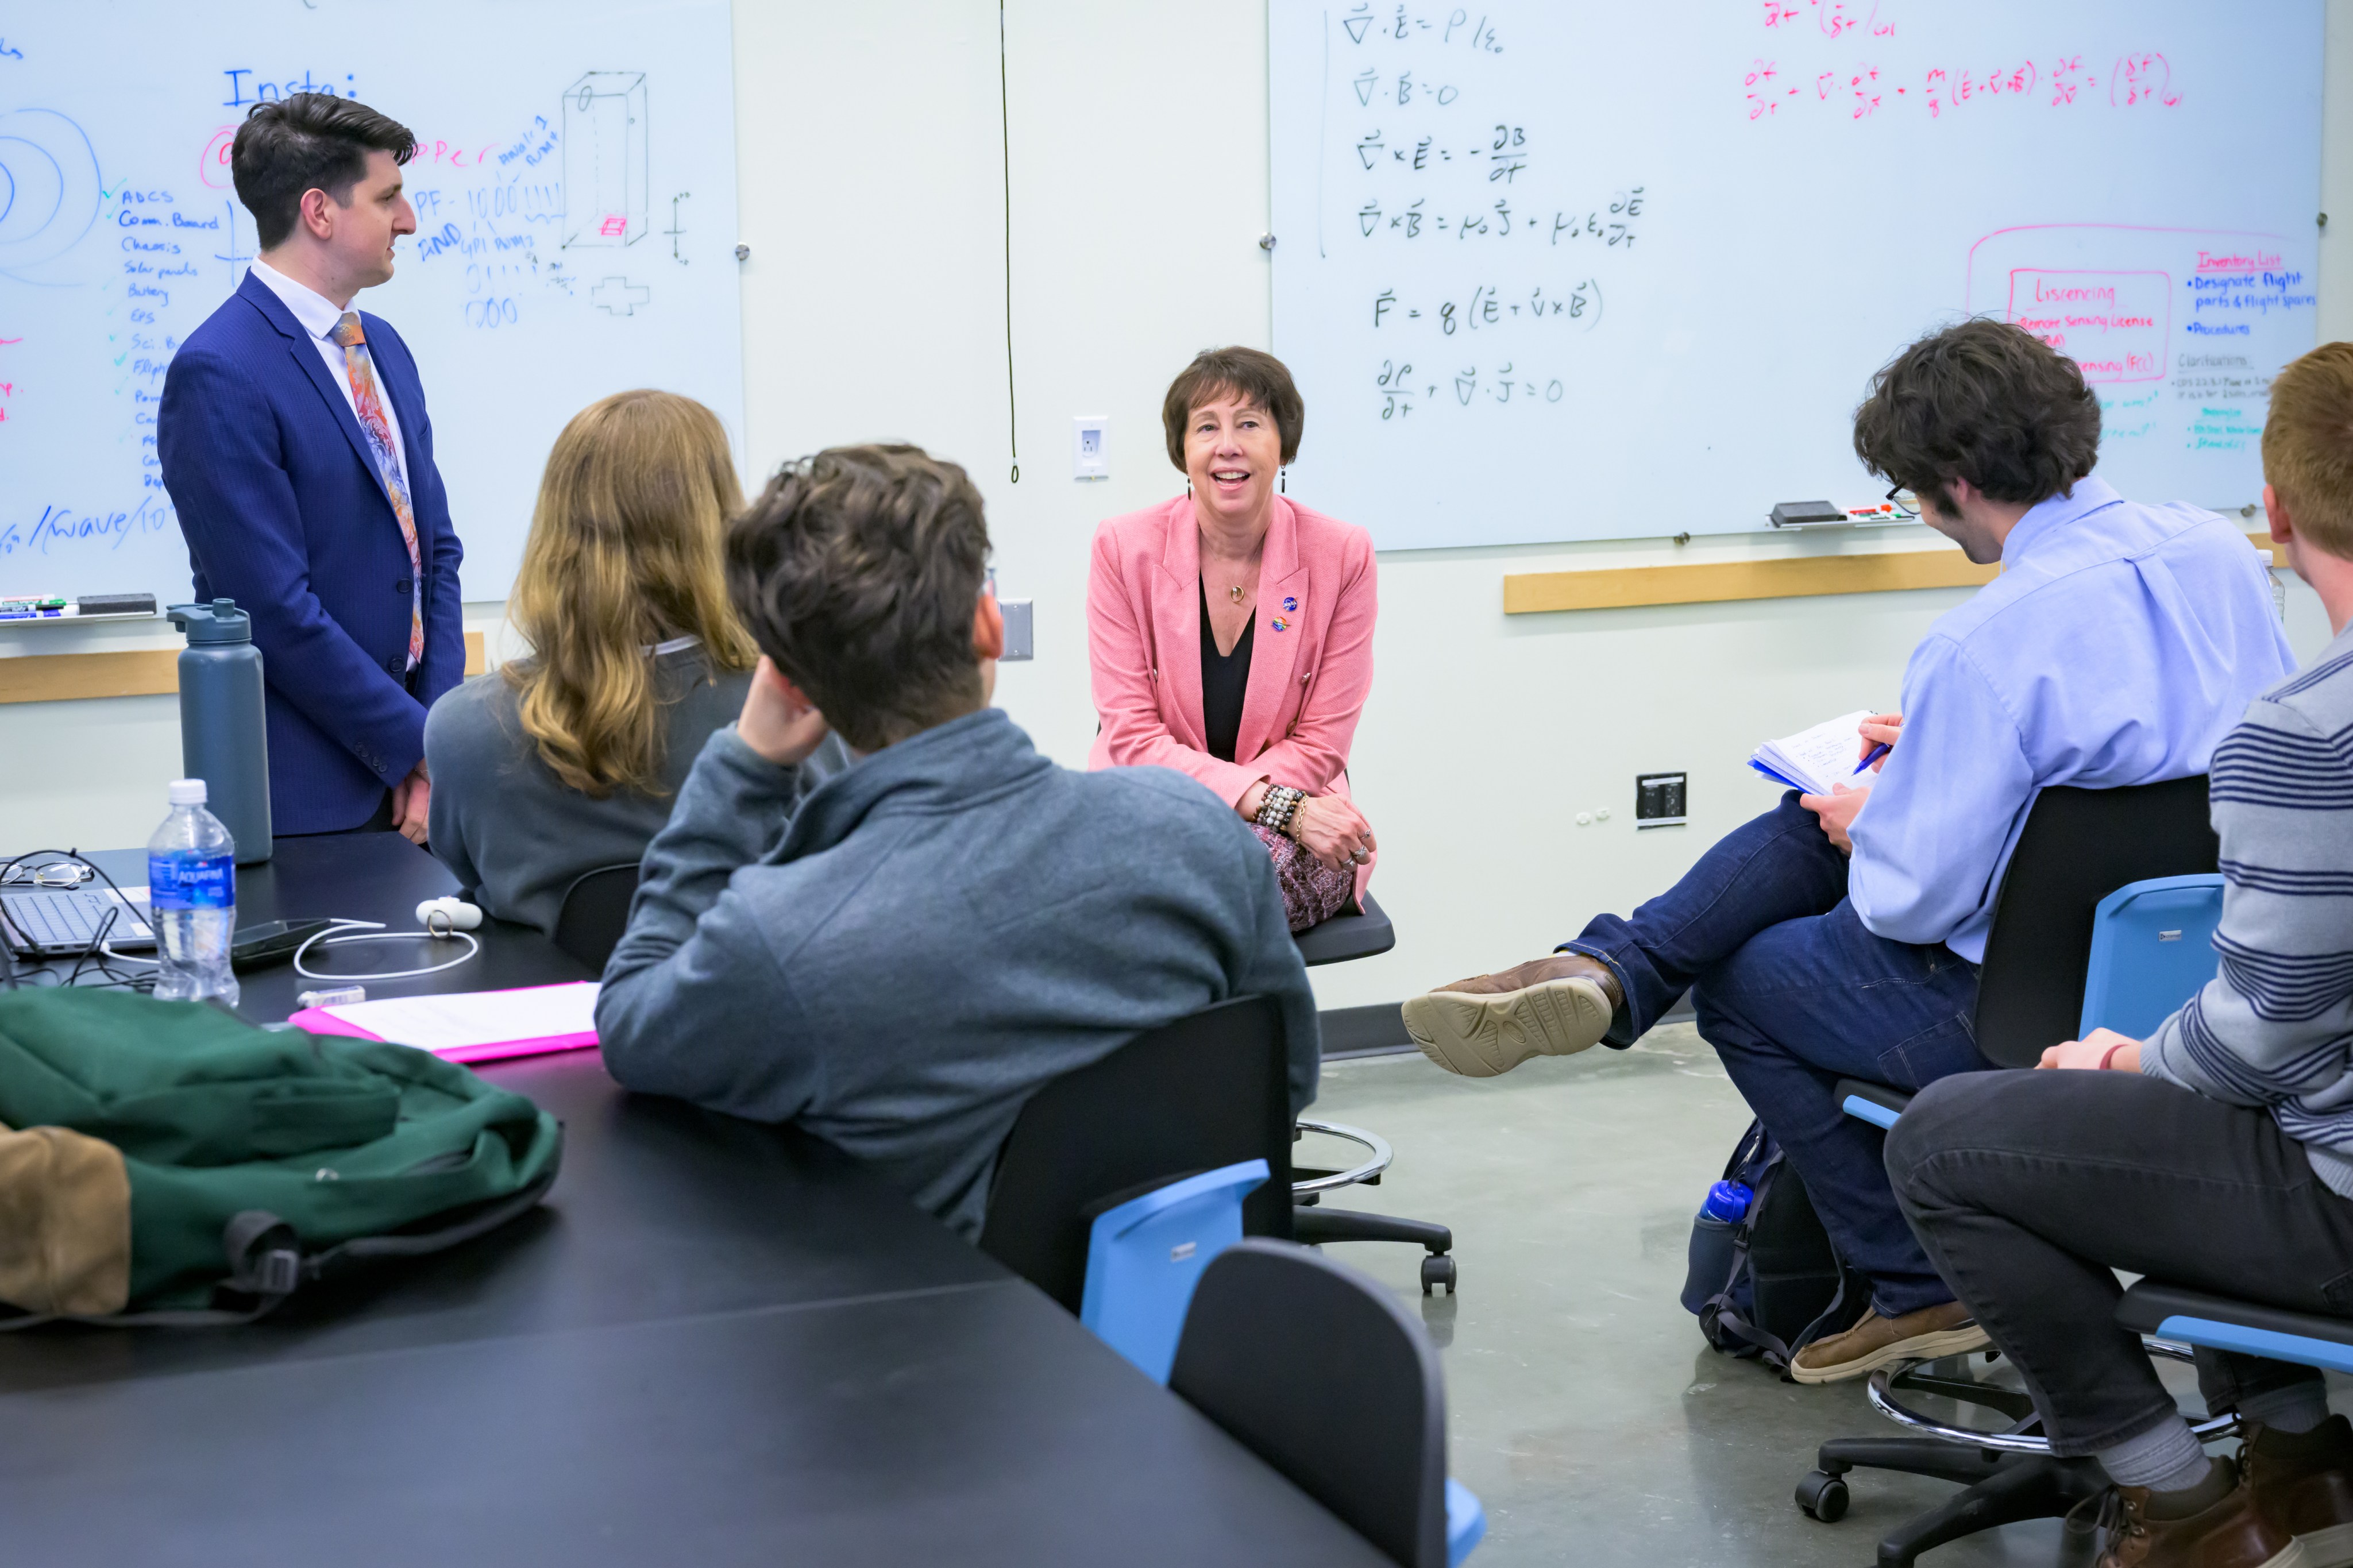 Dr. Nicky fox casually chats with undergraduate students over coffee in a laboratory at the University of Delaware. Students take notes in front of a whiteboard while seated around Dr. Fox.